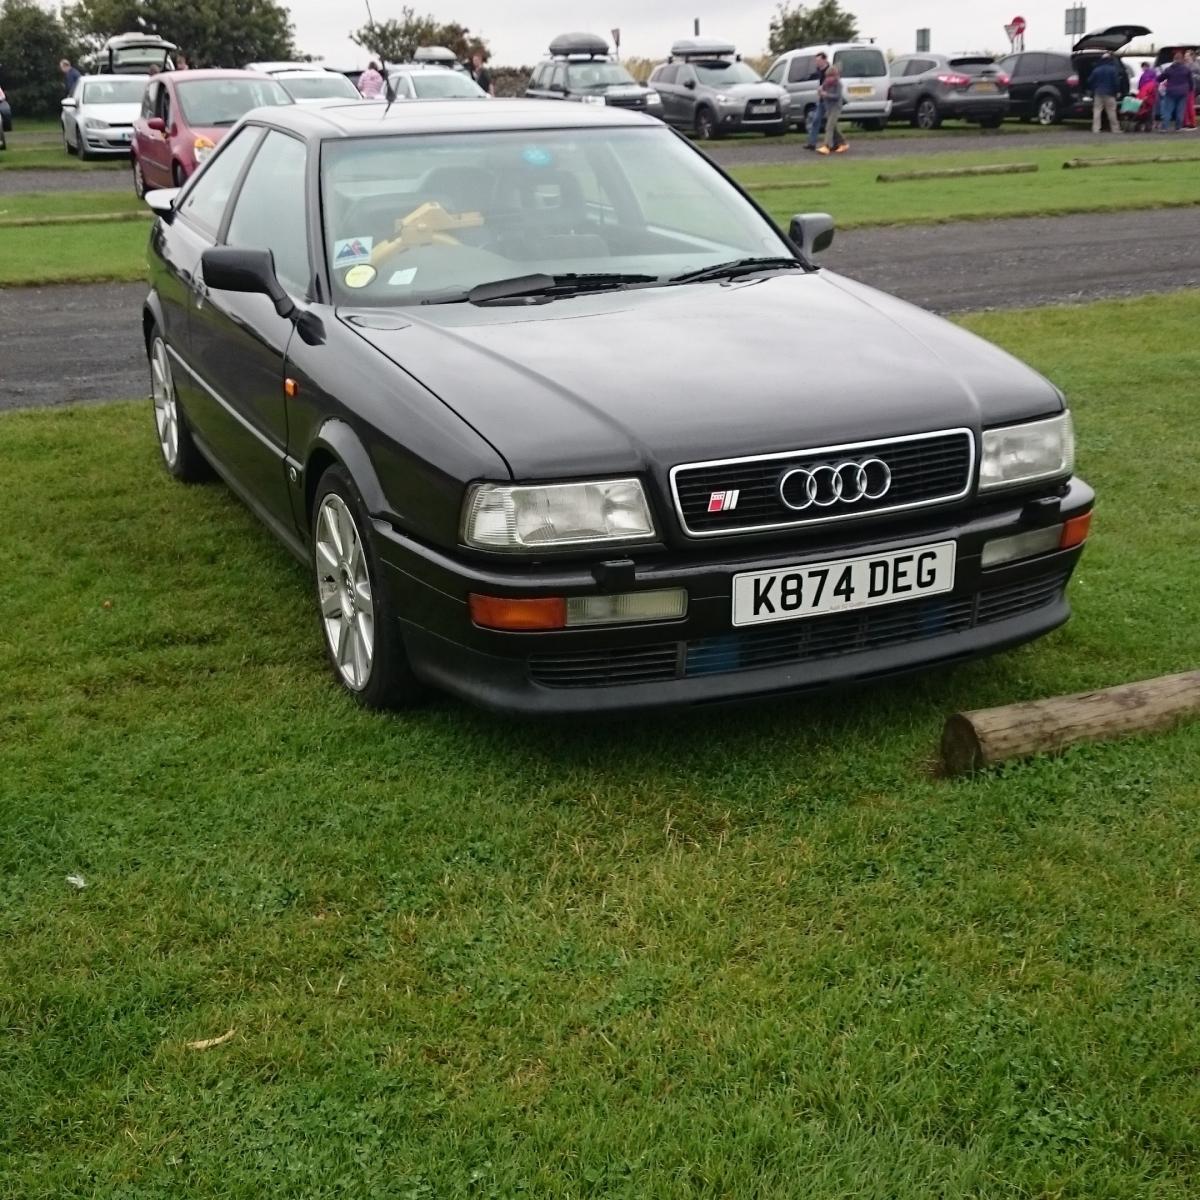 My Audi Coupe S2